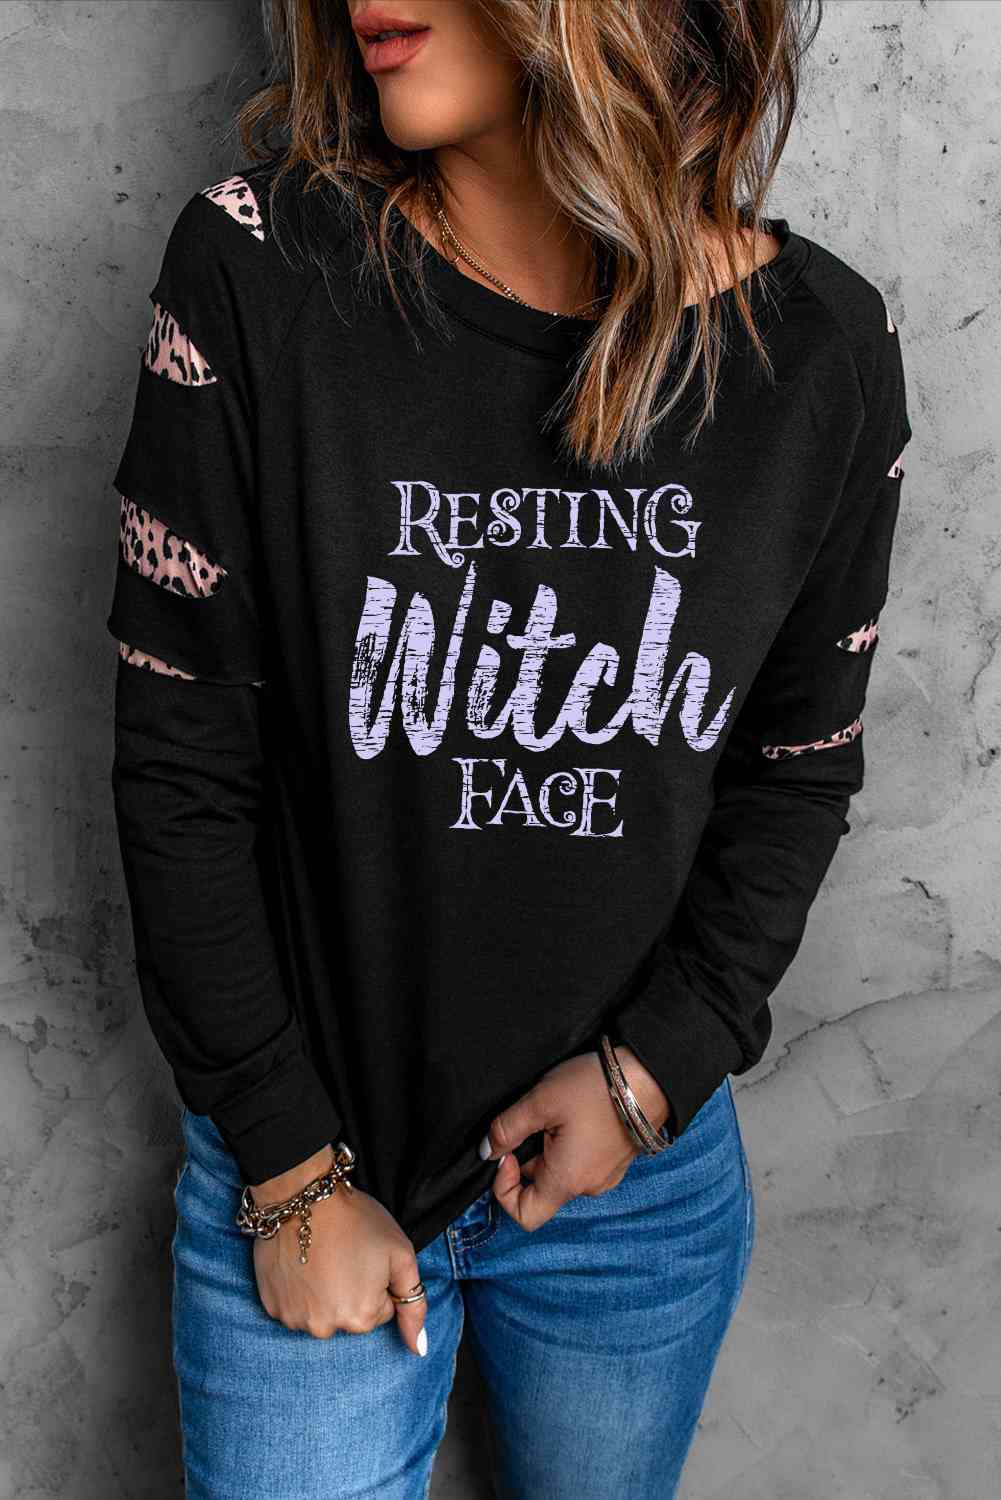 RESTING WITCH FACE Graphic Sweatshirt - Guy Christopher